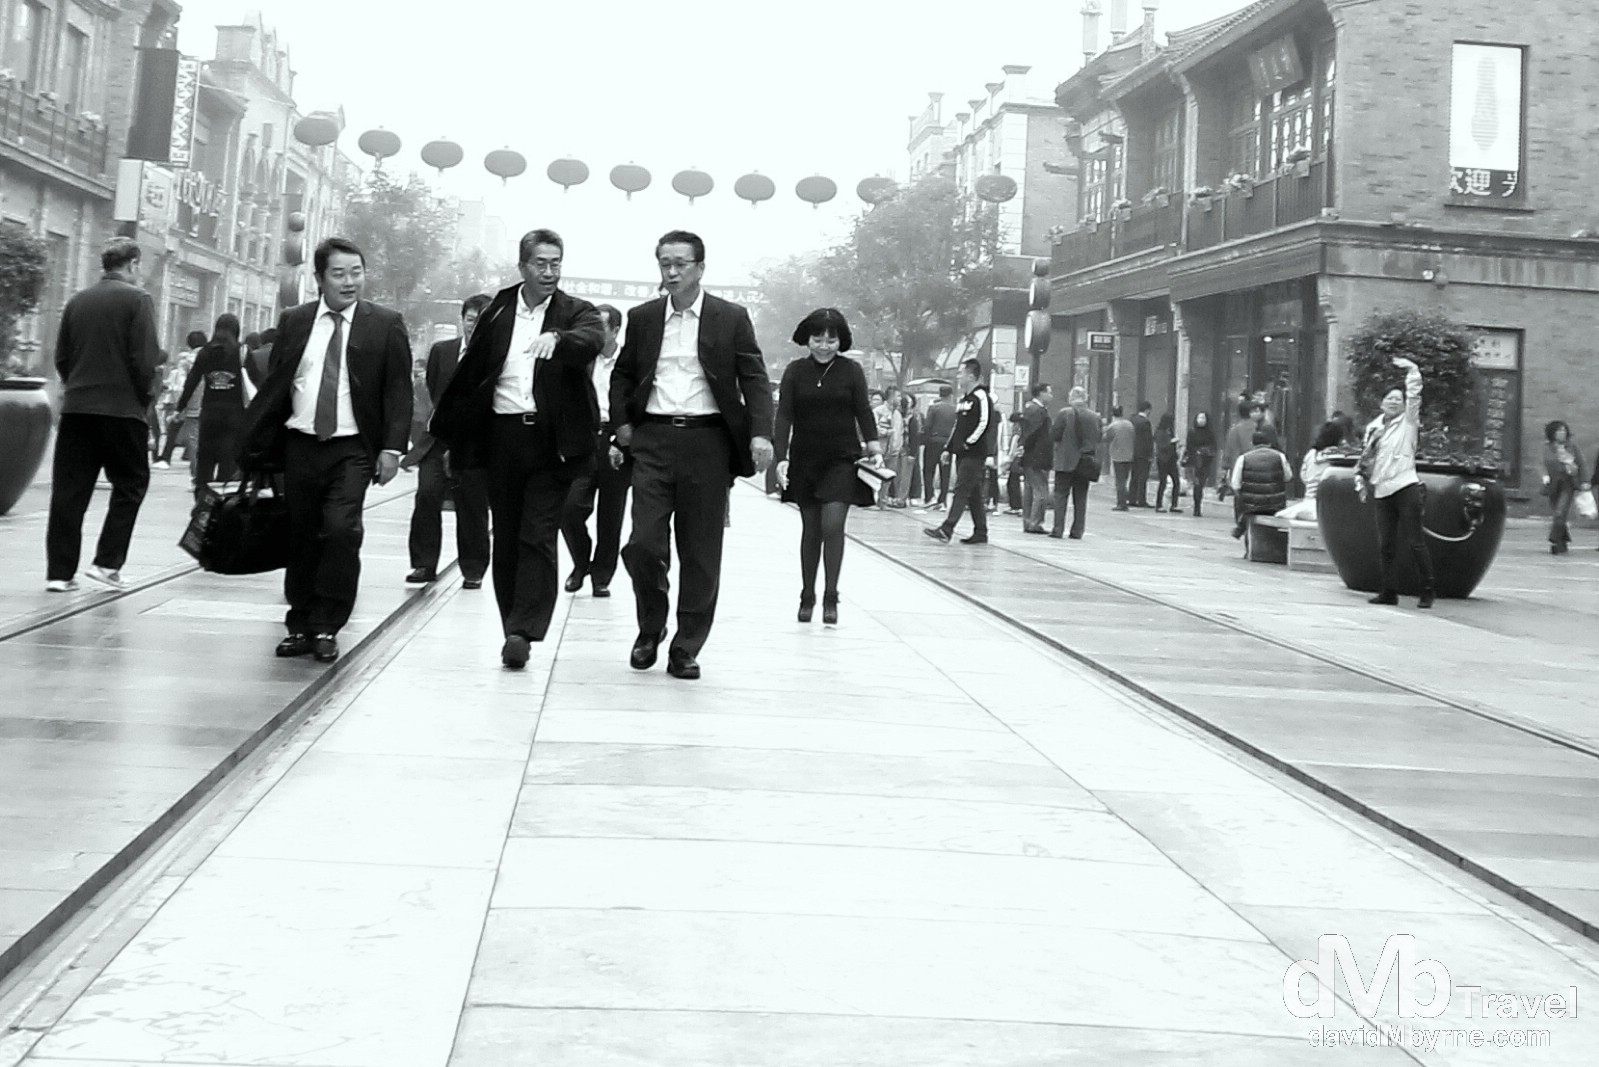 On the march in the Qianmen district of Beijing, China. October 26th 2012.